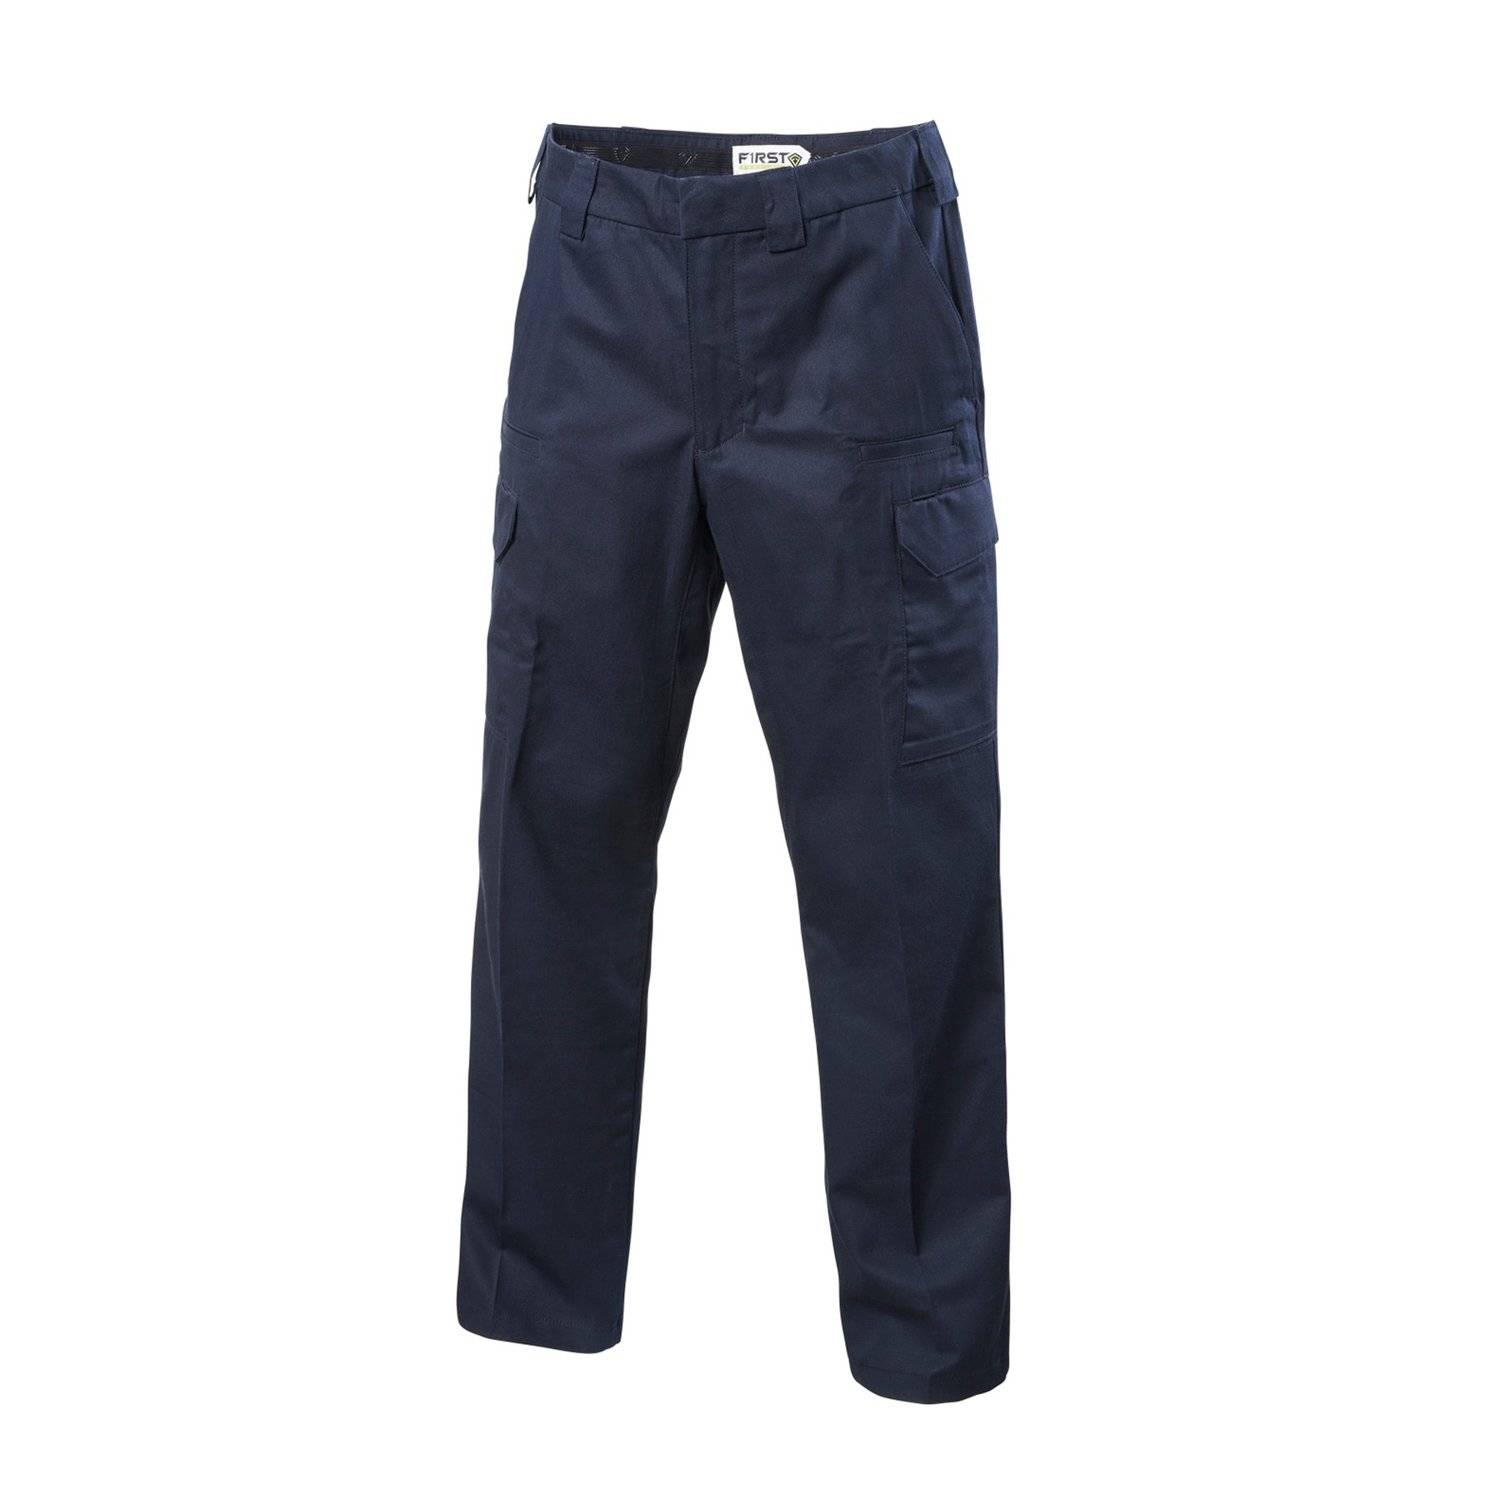 First Tactical Men's Cotton Cargo Station Pants